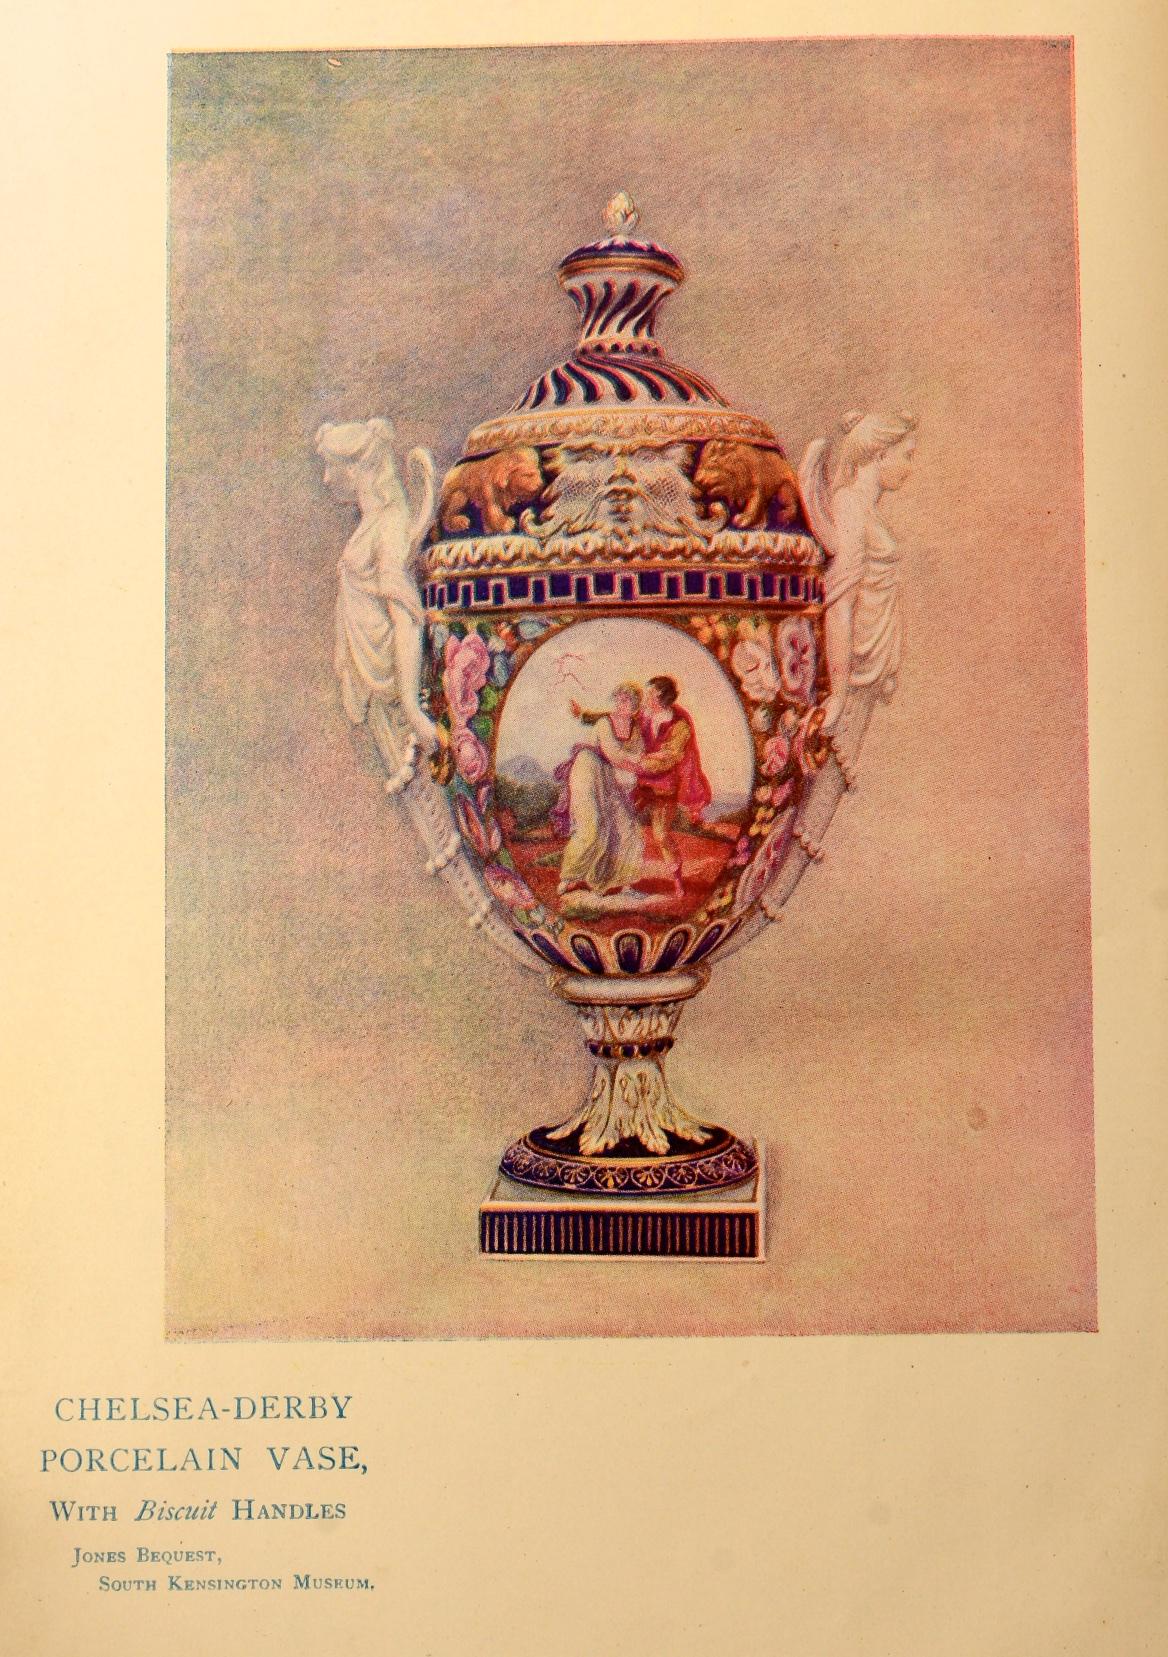 Pottery And Porcelain: A guide to collectors by Frederick Litchfield. London and New York: Truslove, Hanson & Comba, 1900. First edition 1st printing leather bound hardcover. Includes Historical Notices from each Manufacturer. With over 3500